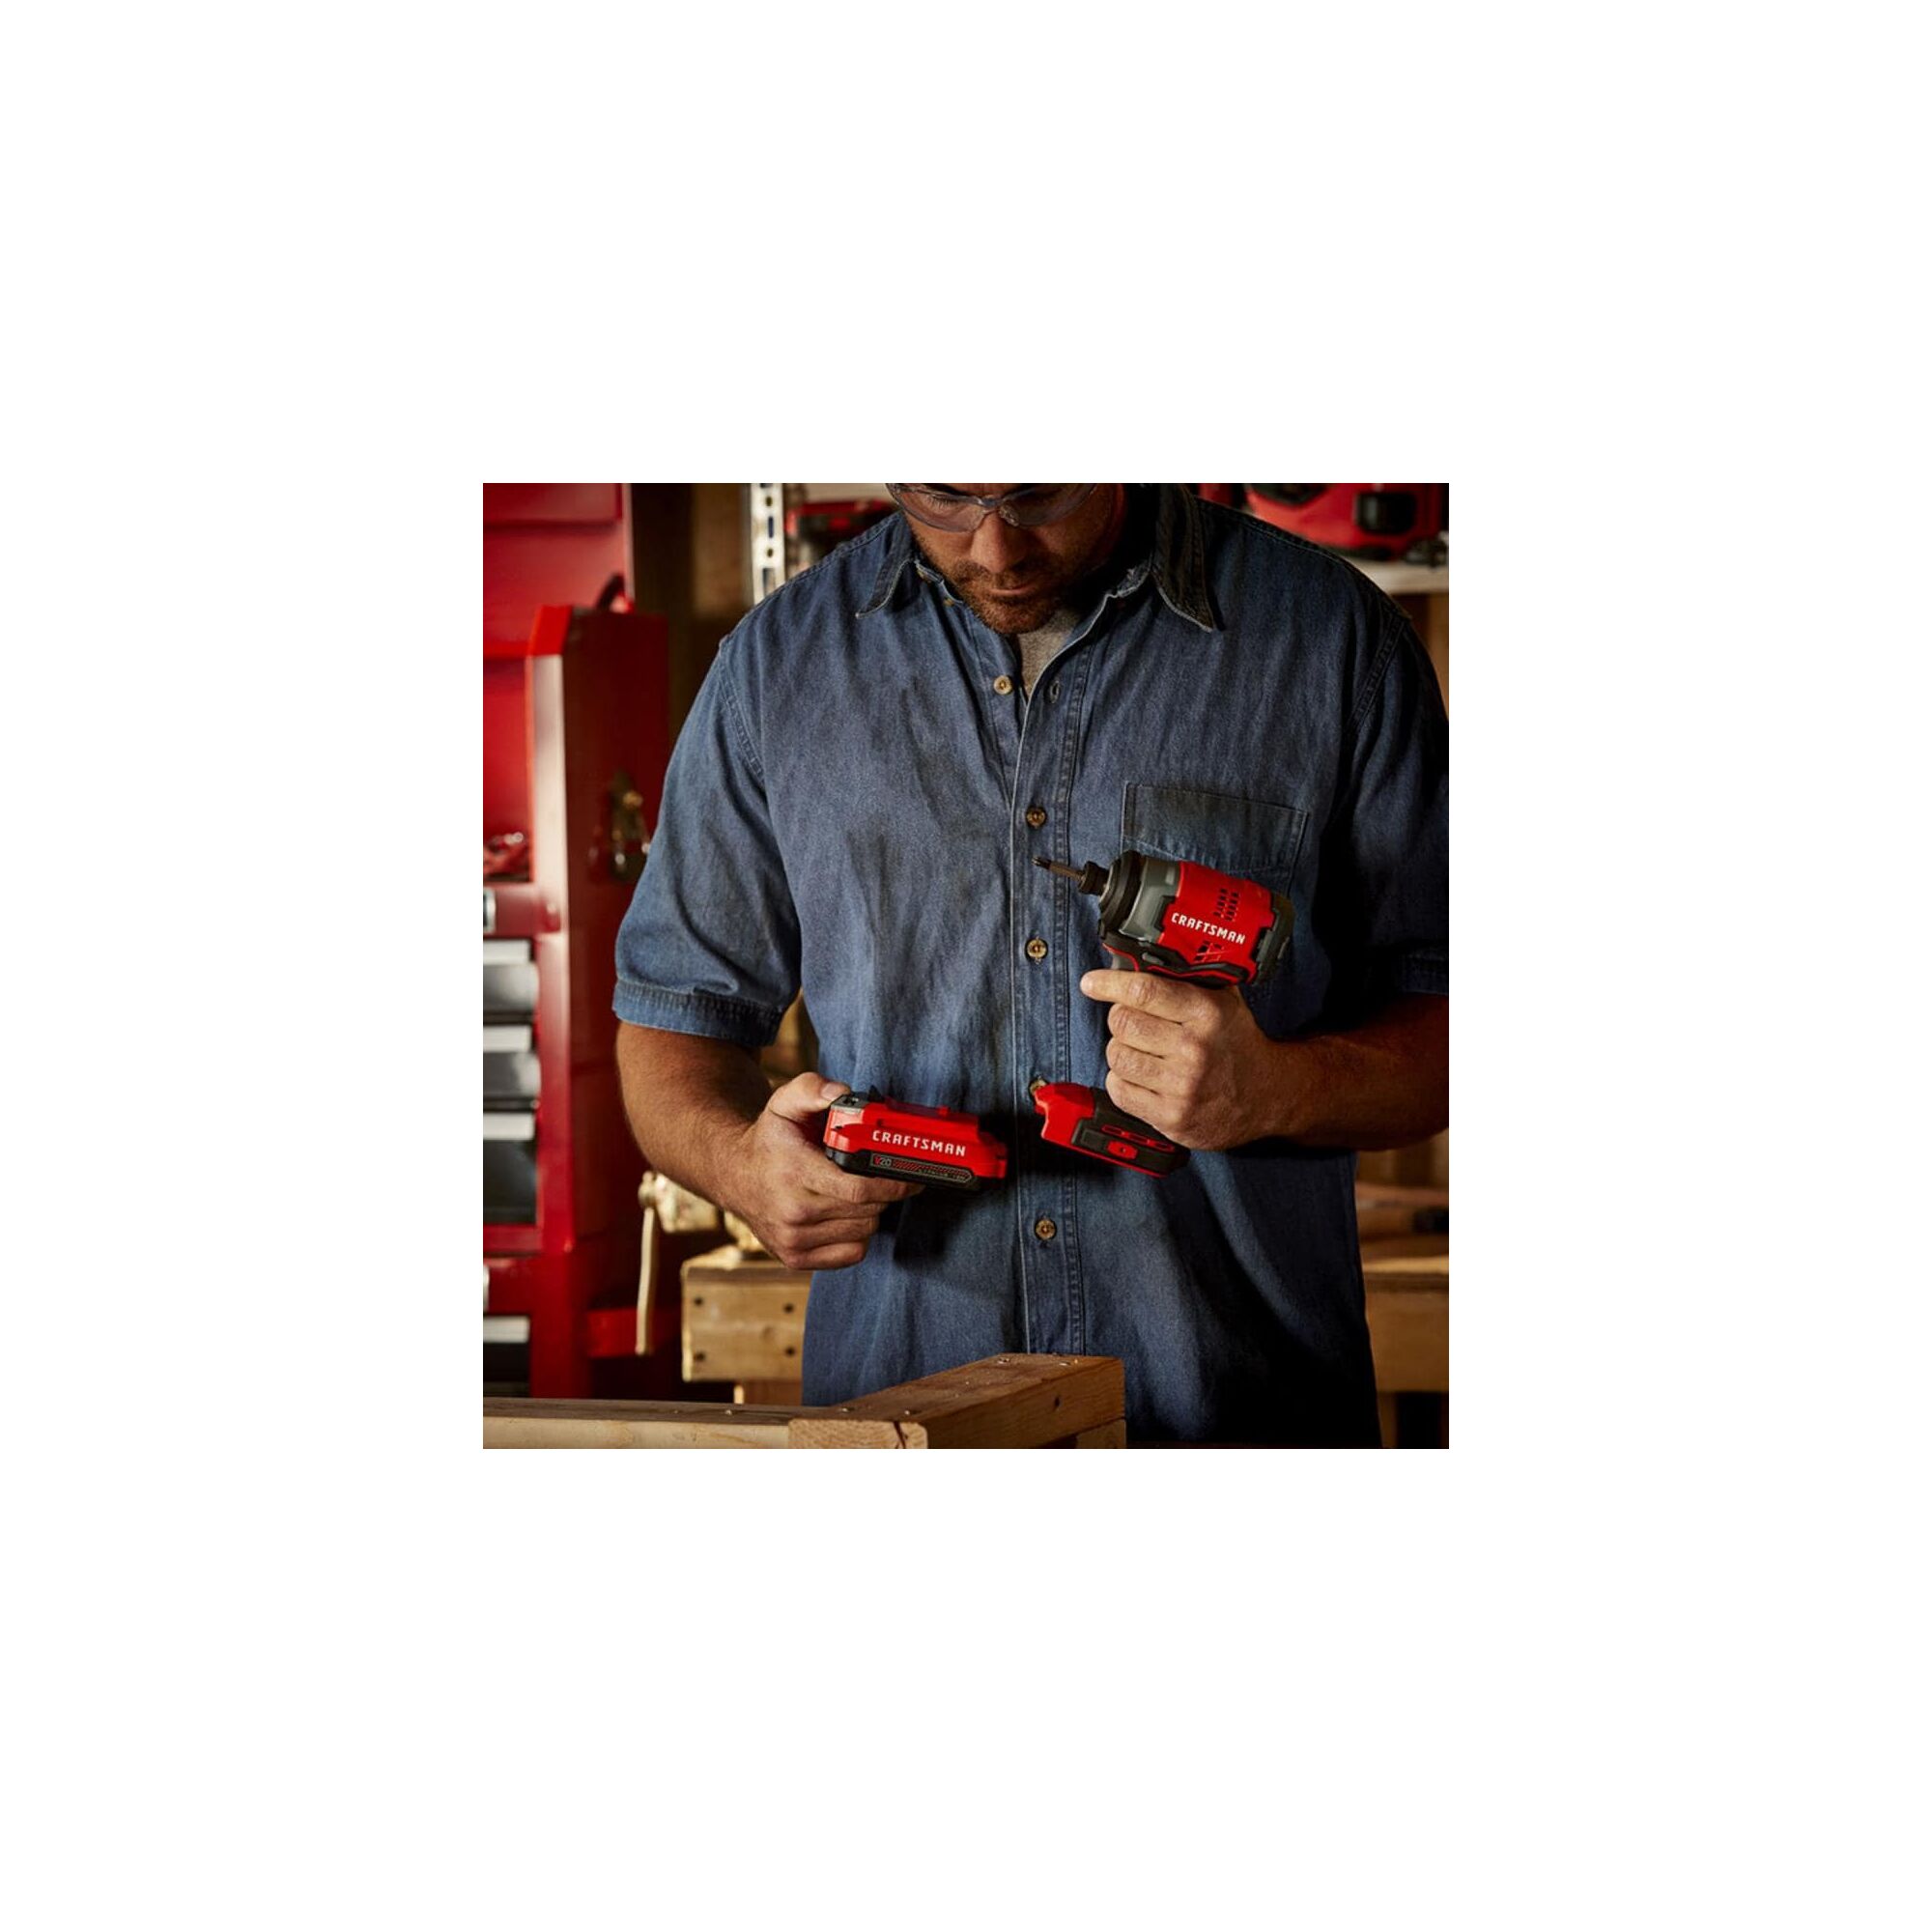 View of CRAFTSMAN Drills: Impact Driver in lifestyle use